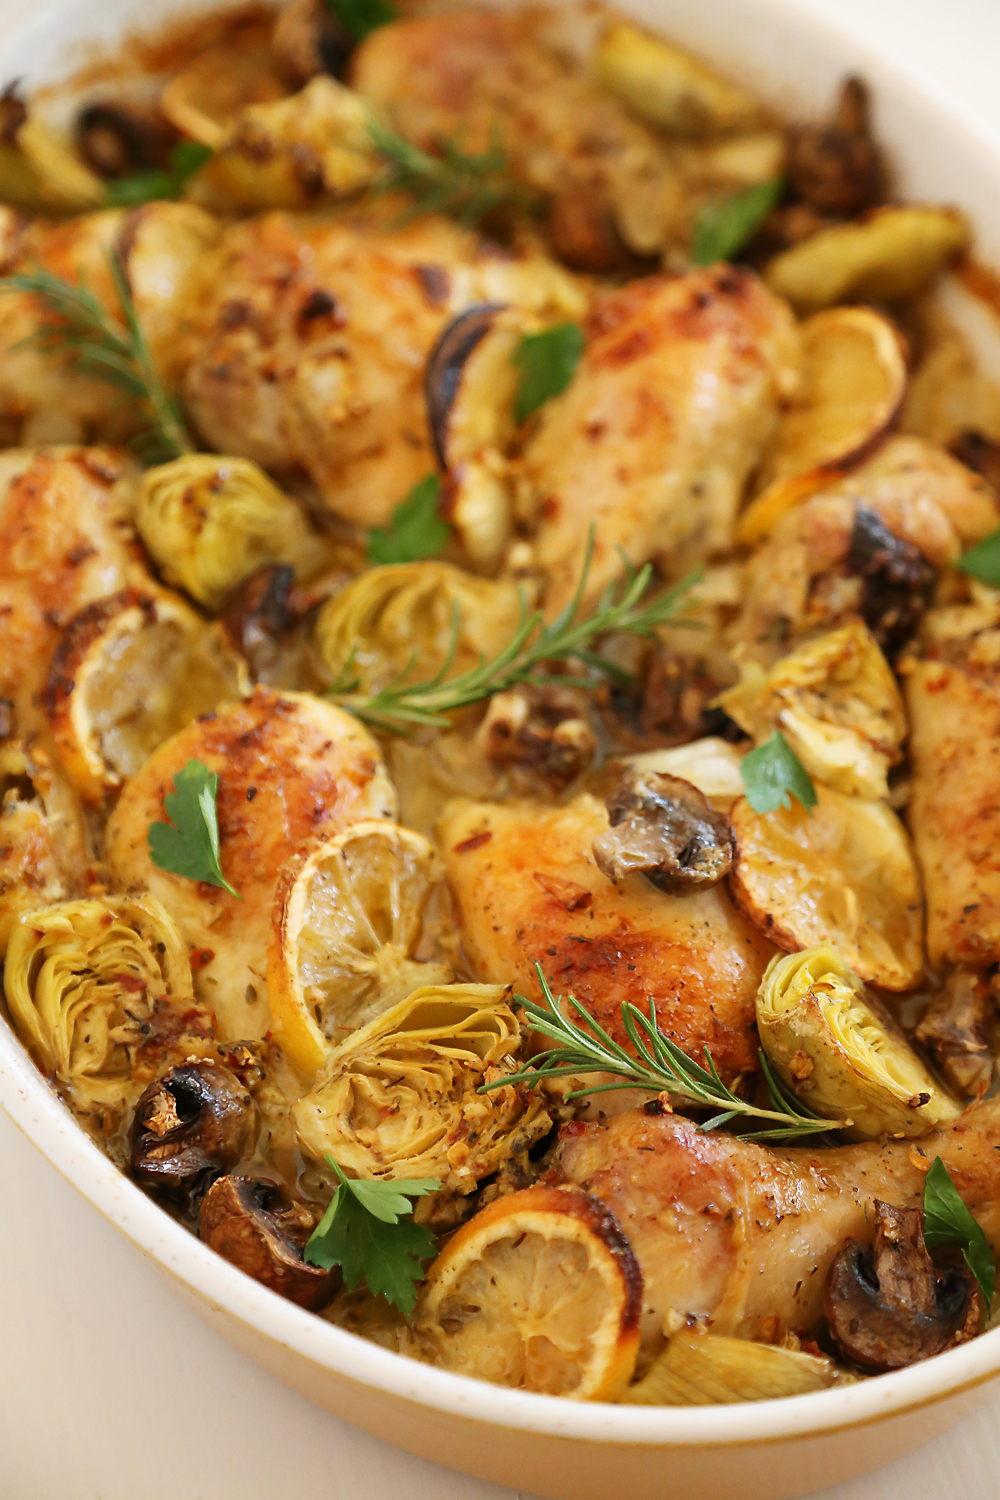 Lemon and Artichoke Oven Roasted Chicken – The Comfort of Cooking